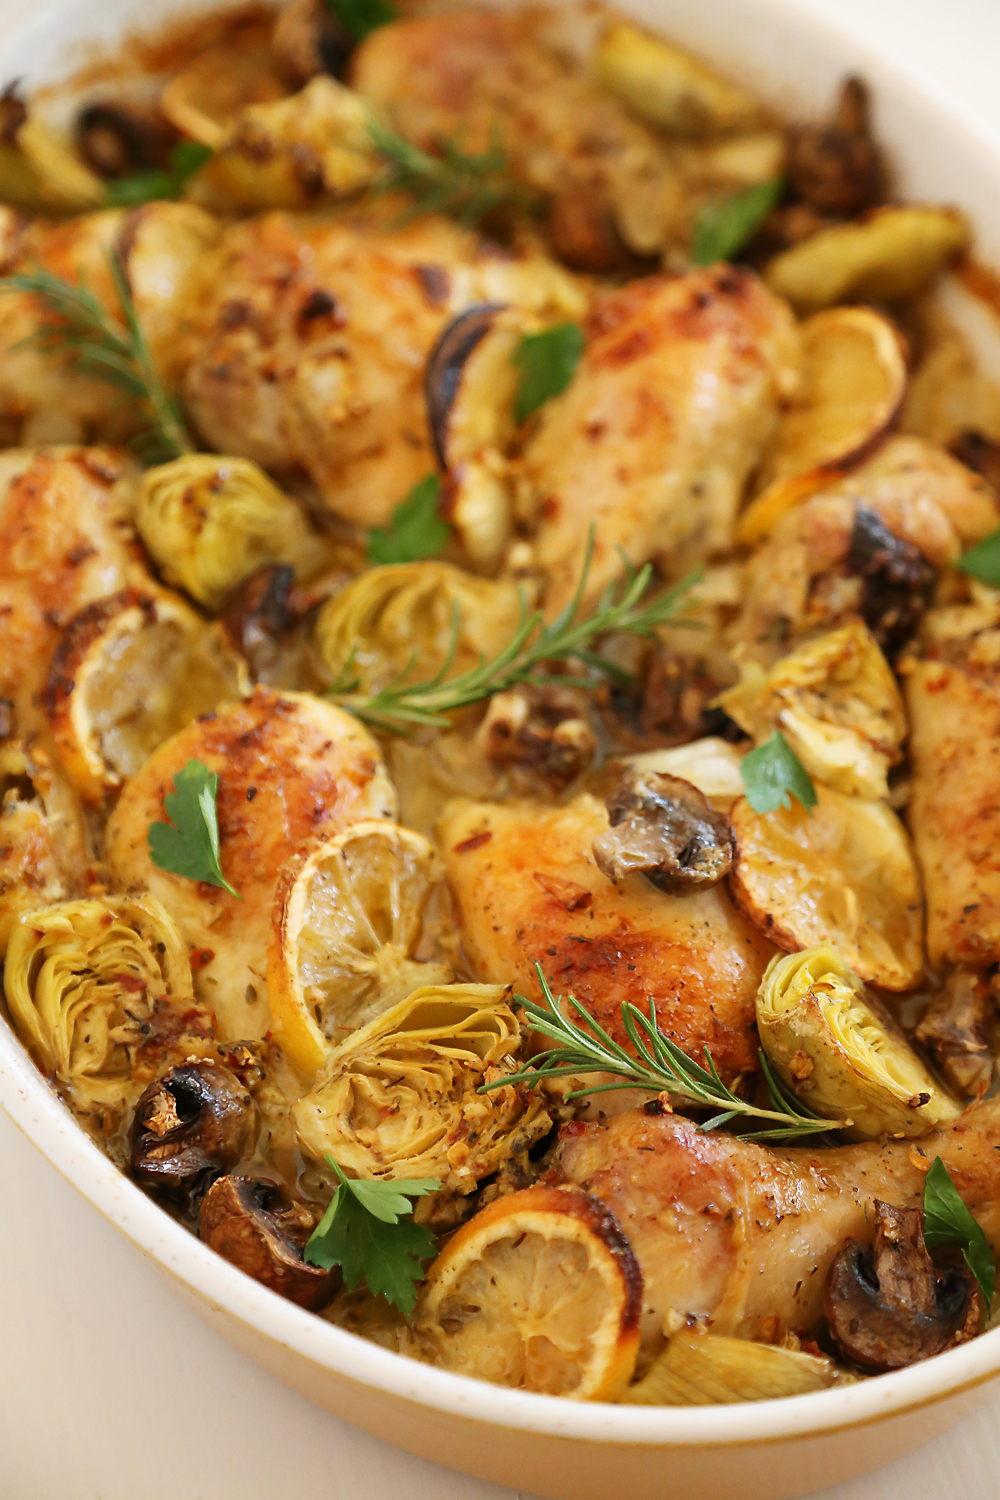 Lemon and Artichoke Oven Roasted Chicken – The Comfort of Cooking